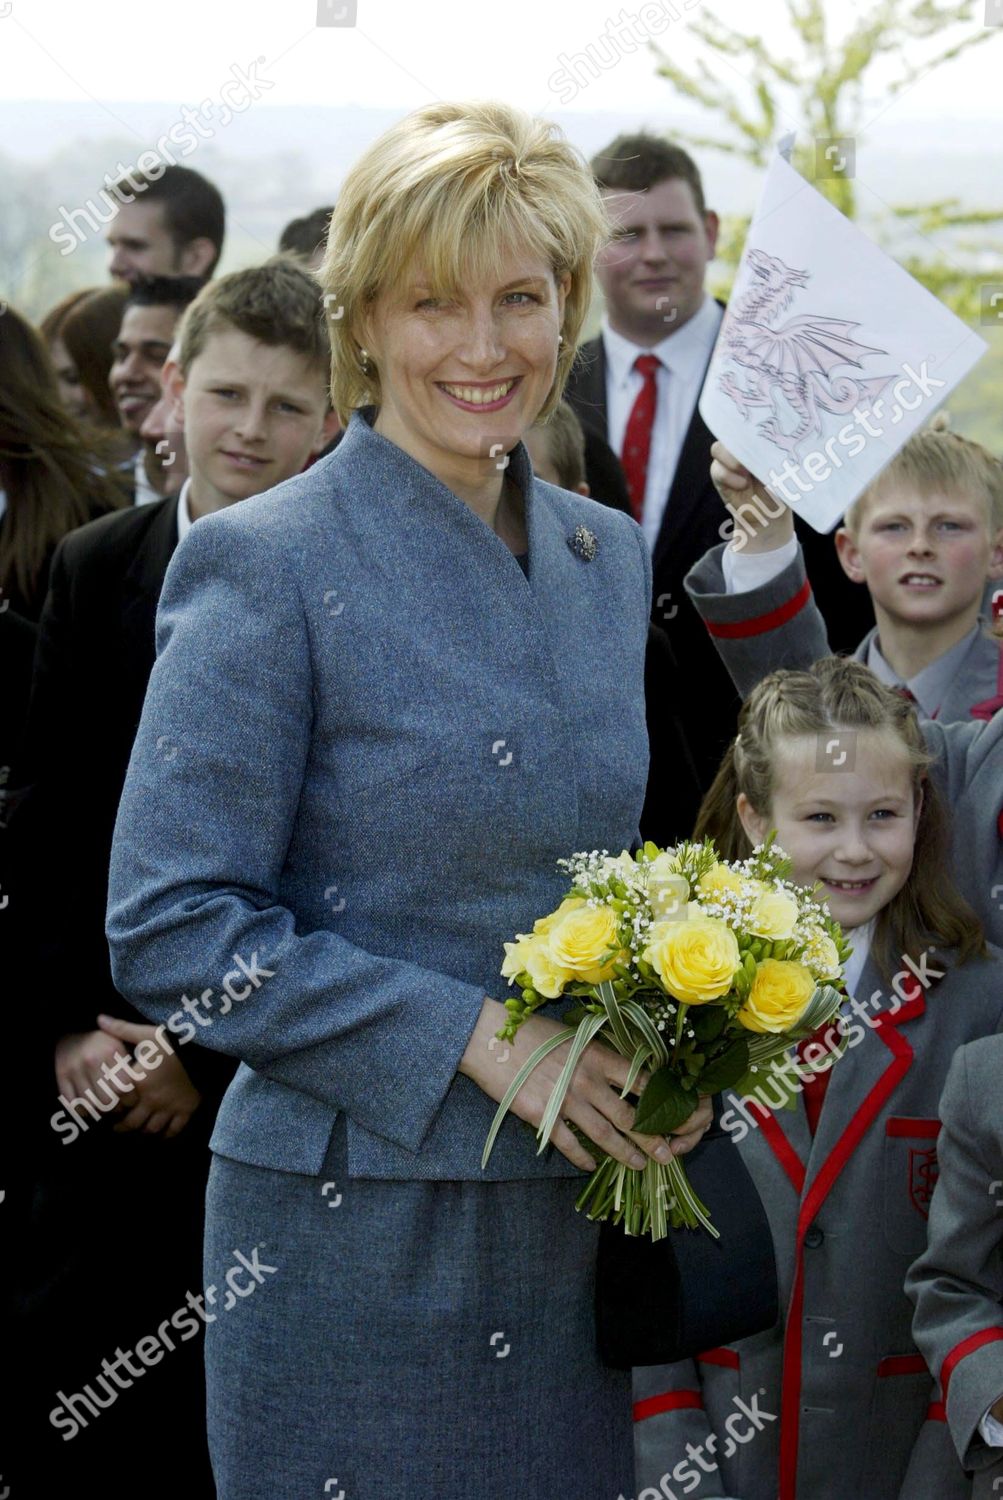 prince-edward-and-sophie-countess-of-wessex-visiting-rougemont-school-newport-wales-britain-shutterstock-editorial-415508q.jpg